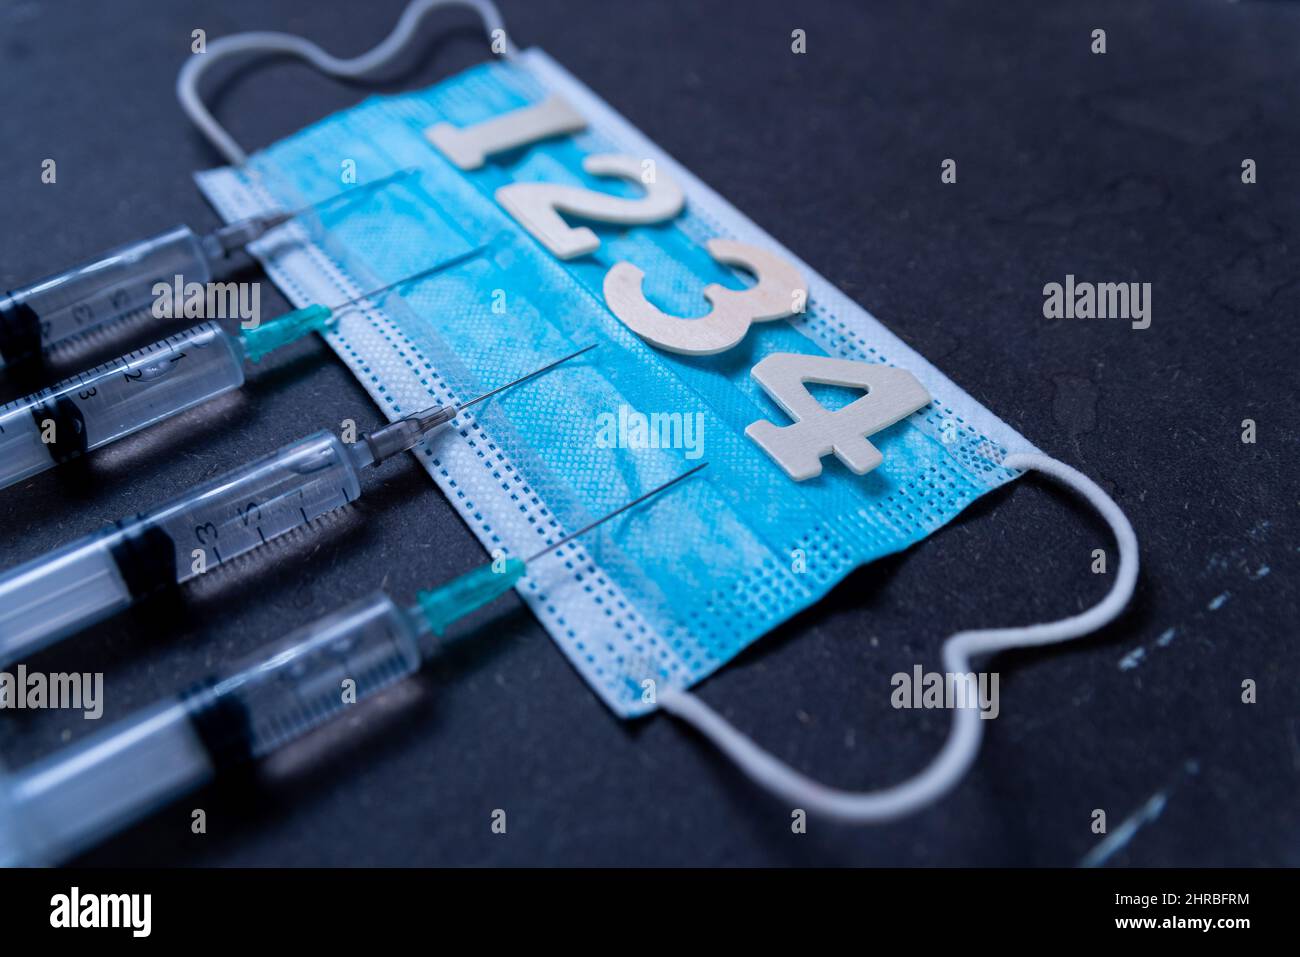 Fourth covid vaccine shot and jab concept with face mask. Four syringes are seen on table as a concept for the 4th covid-19 vaccine dose, also called Stock Photo